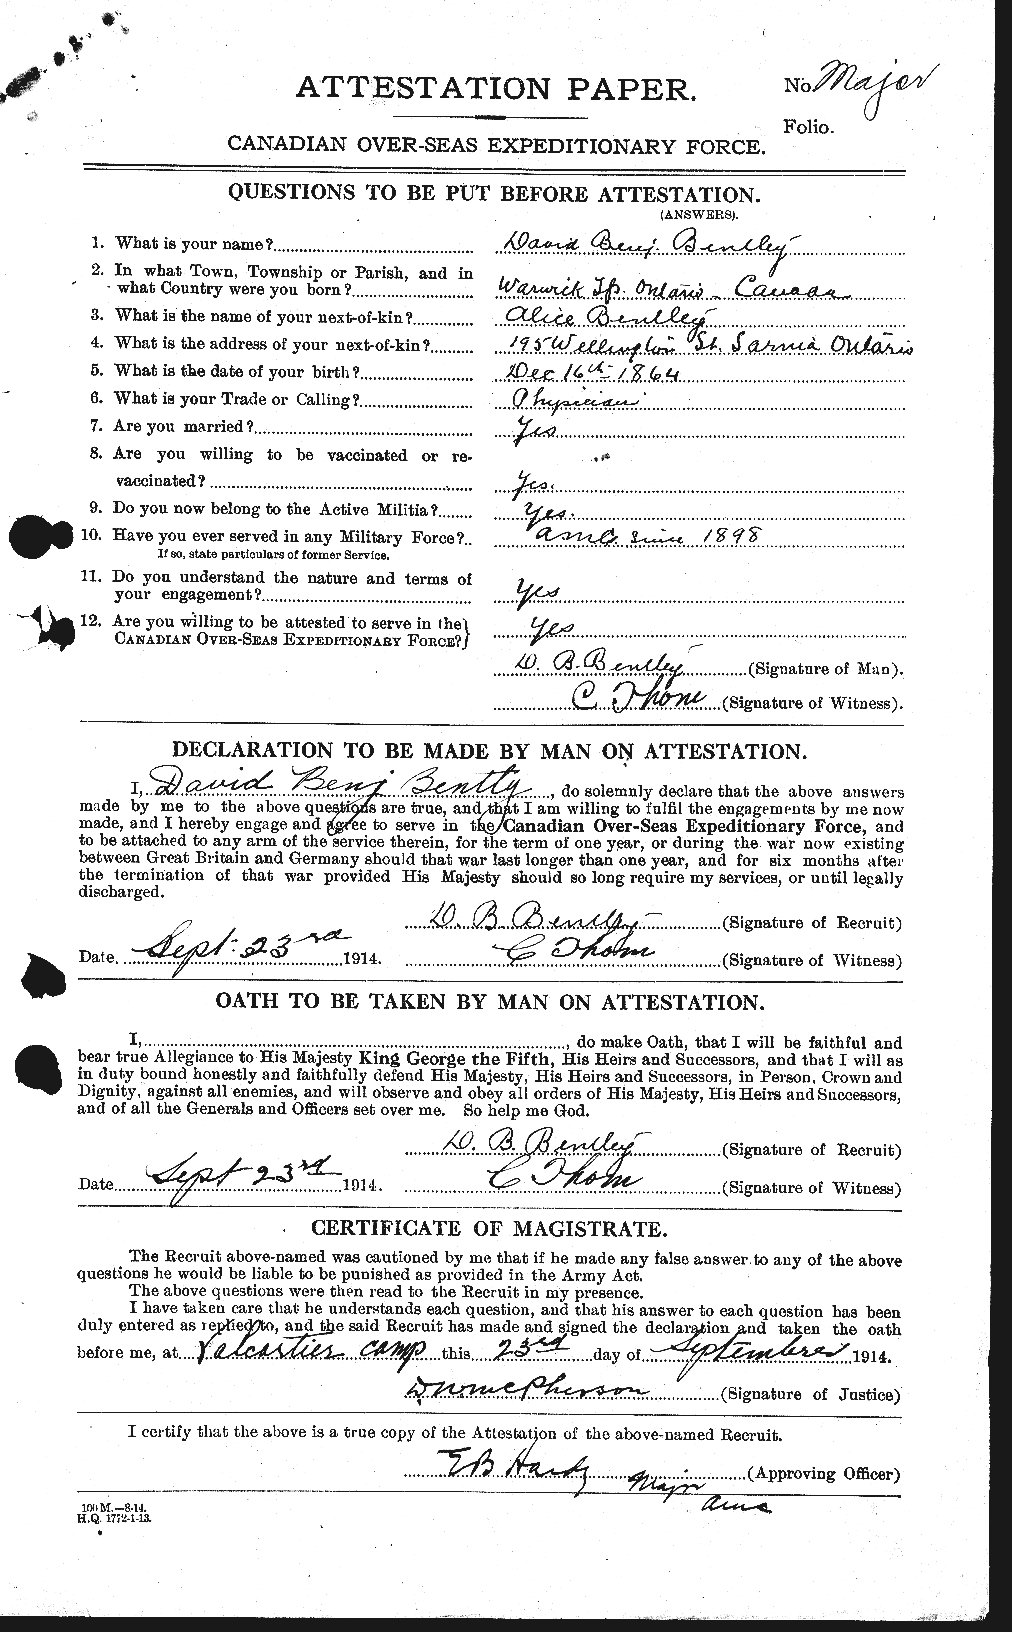 Personnel Records of the First World War - CEF 237949a